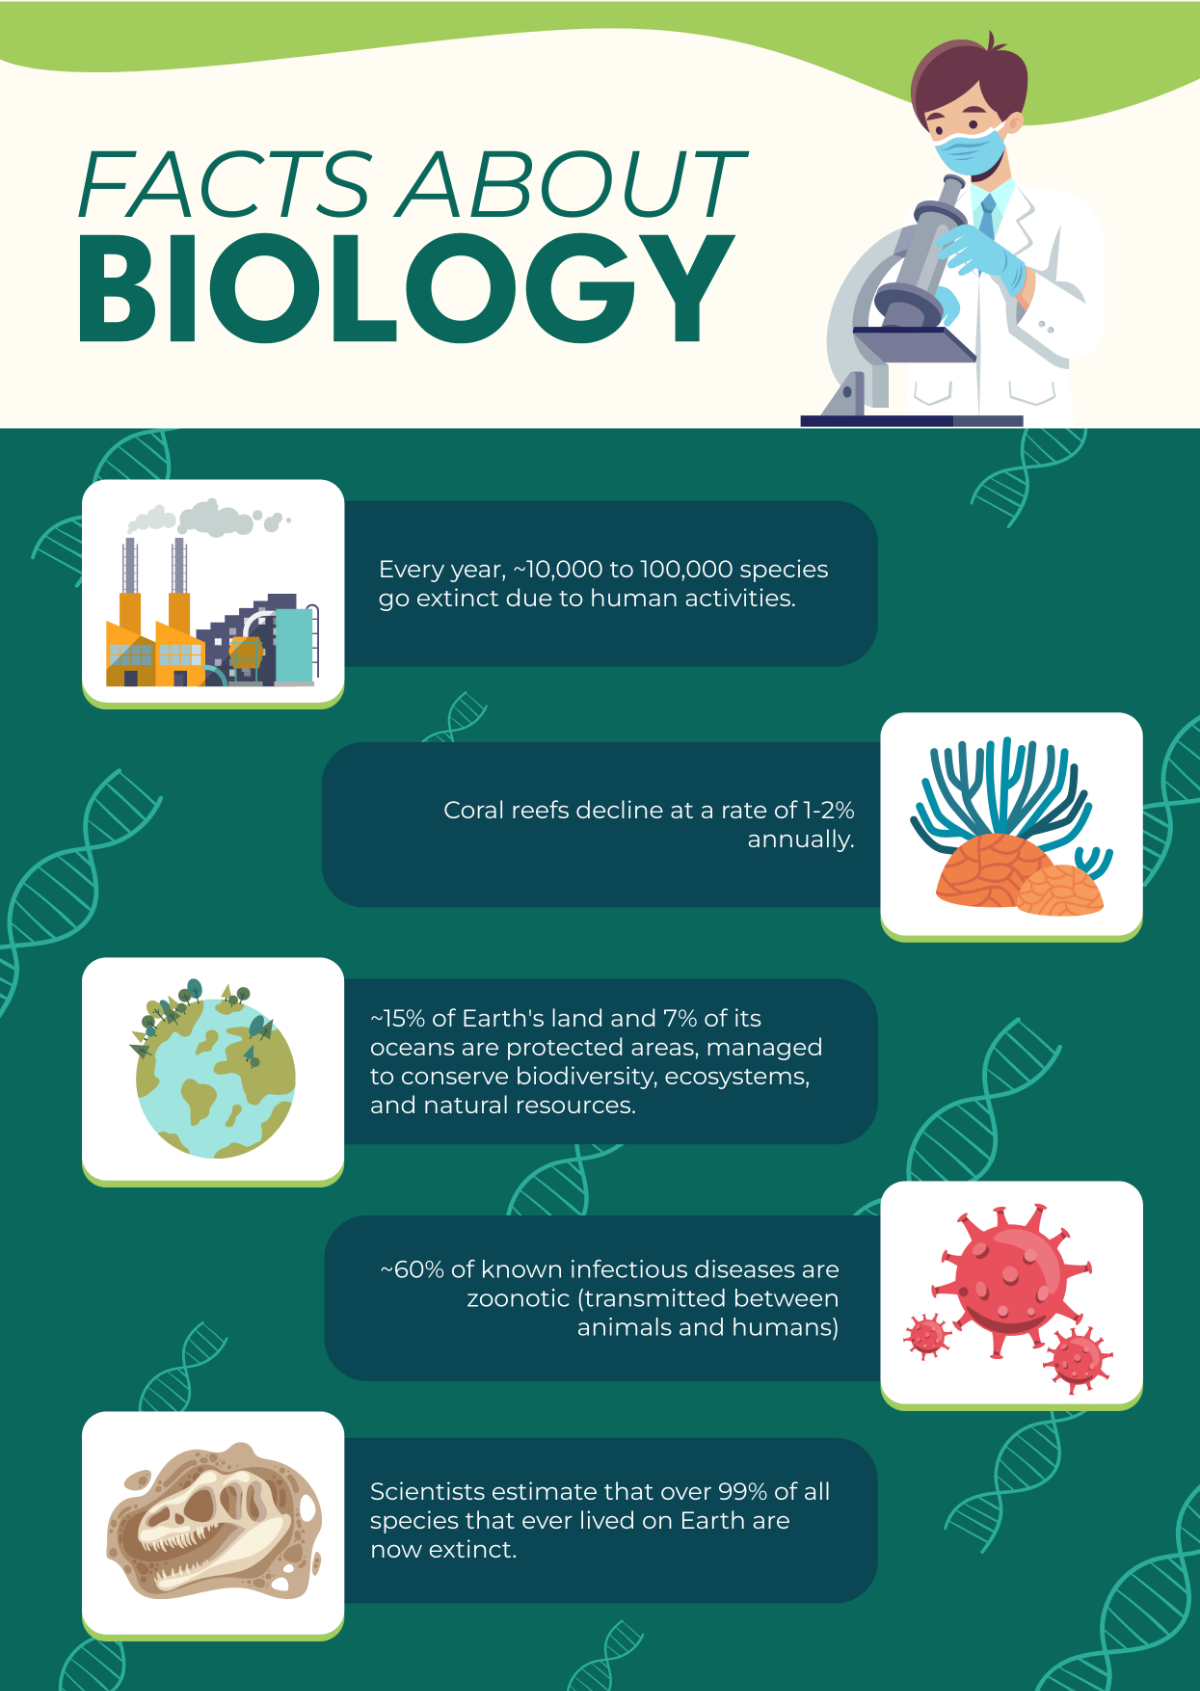 Biology Infographic